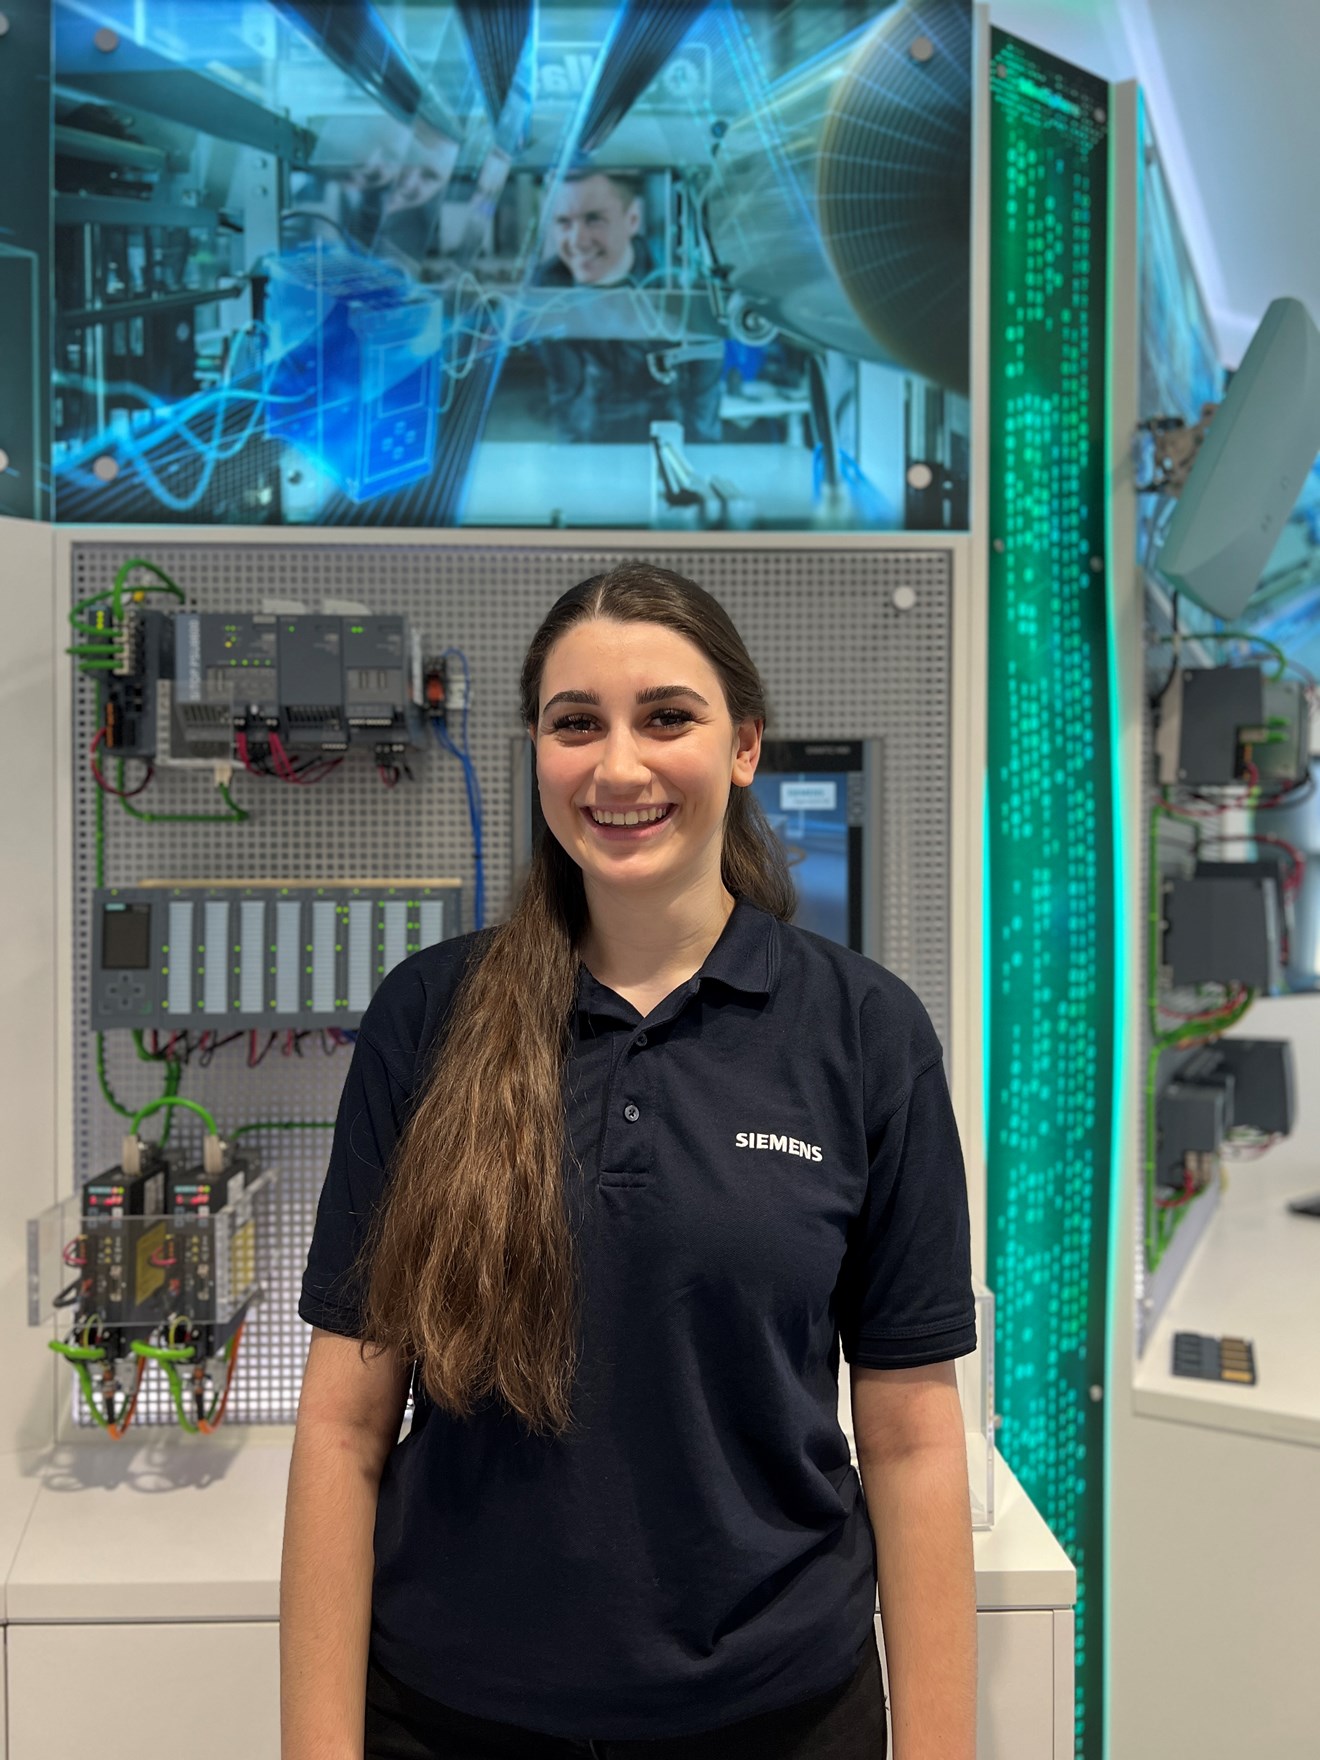 Siemens apprentice Lucy Yelland is taking part in the National Finals of the 2022 WorldSkills UK competition